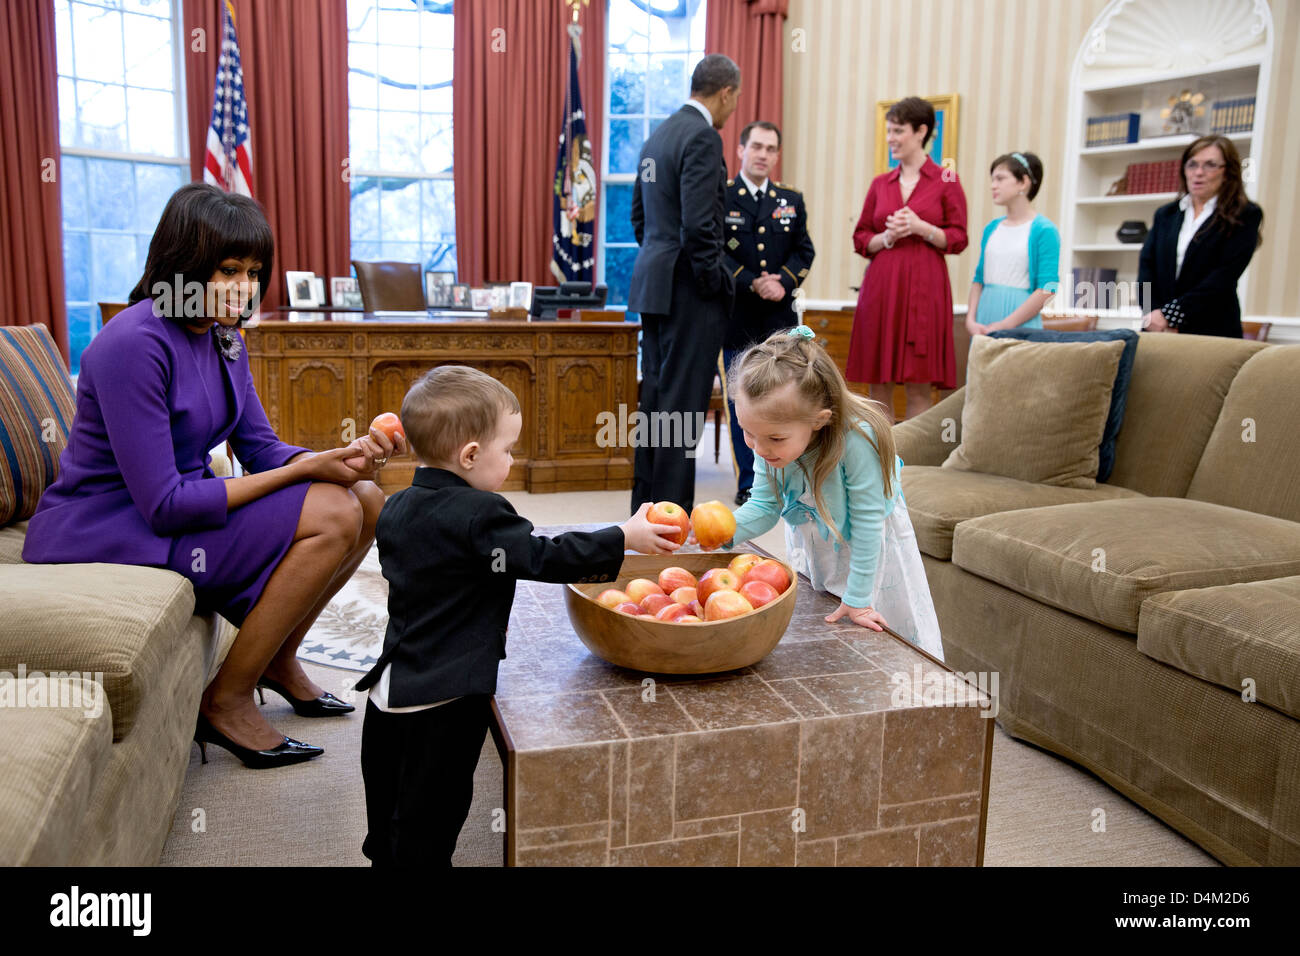 US President Barack Obama and First Lady Michelle Obama visit with former Staff Sergeant Clinton Romesha and his family in the Oval Office prior to a ceremony to award Romesha the Medal of Honor February 11, 2013 in Washington, DC. Remesha's family members, from left, are: son Colin Romesha, 2; daughter Gwen Romesha, 4; wife Tammy Romesha, daughter Dessi Romesha, 11; and mother Tish Rogers. Stock Photo